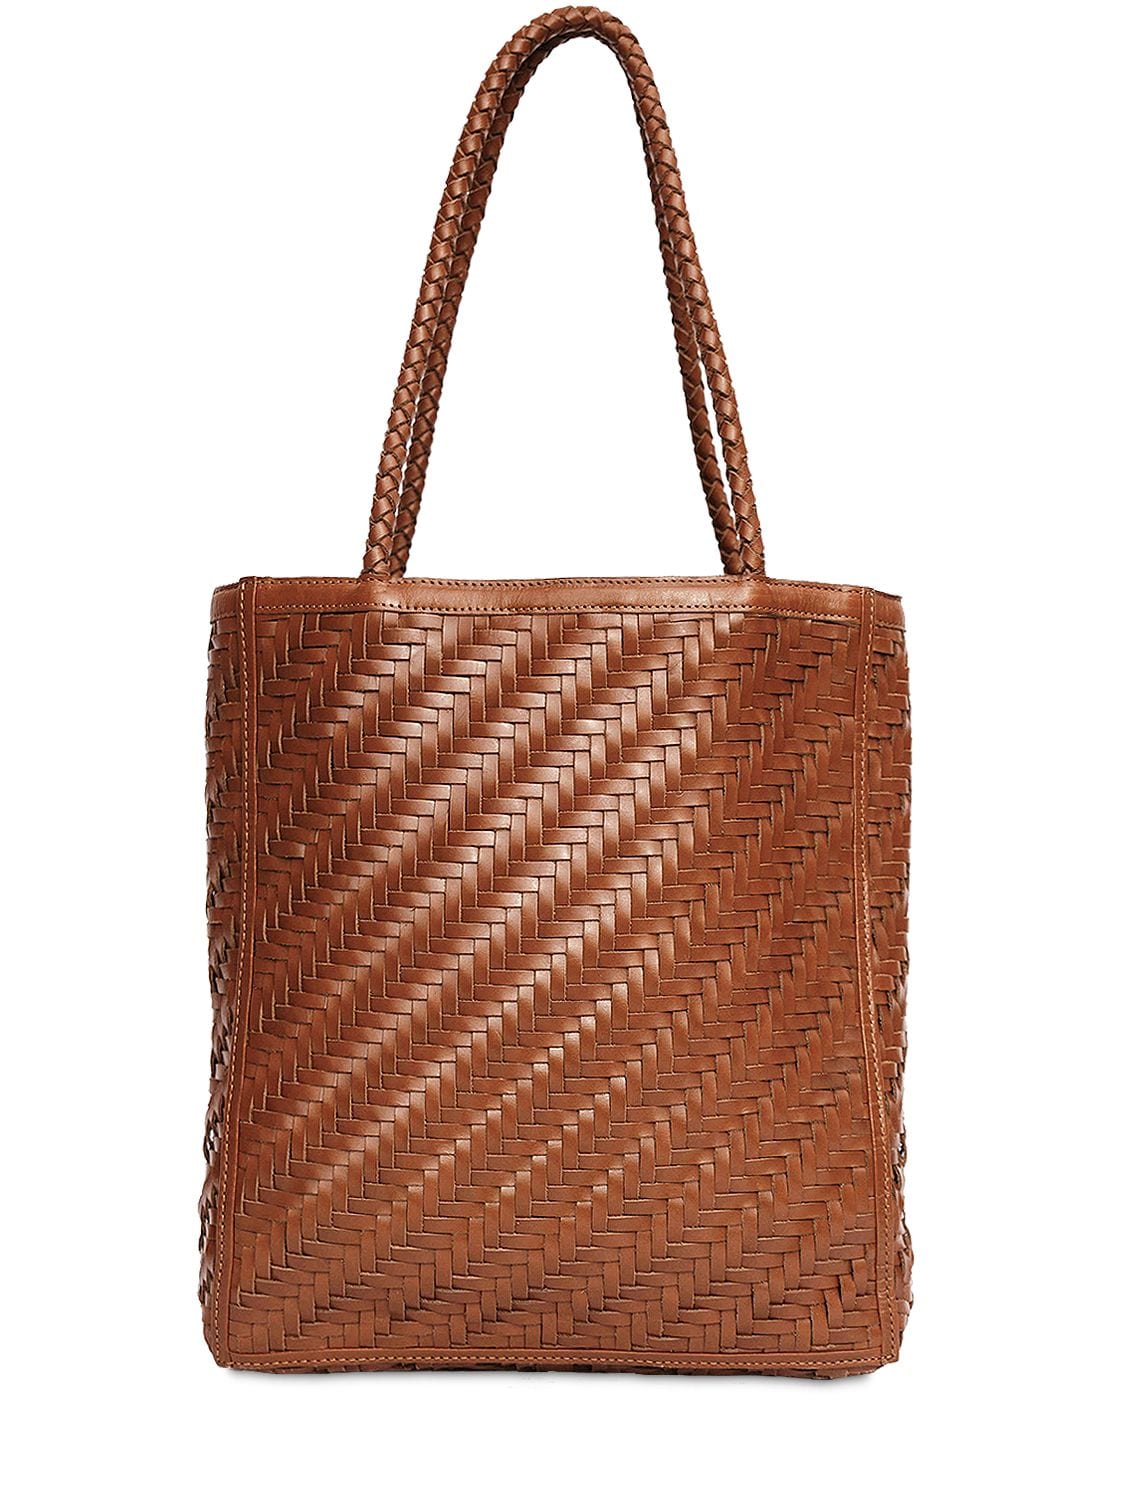 Bembien Le Tote Leather Bag In Sienna